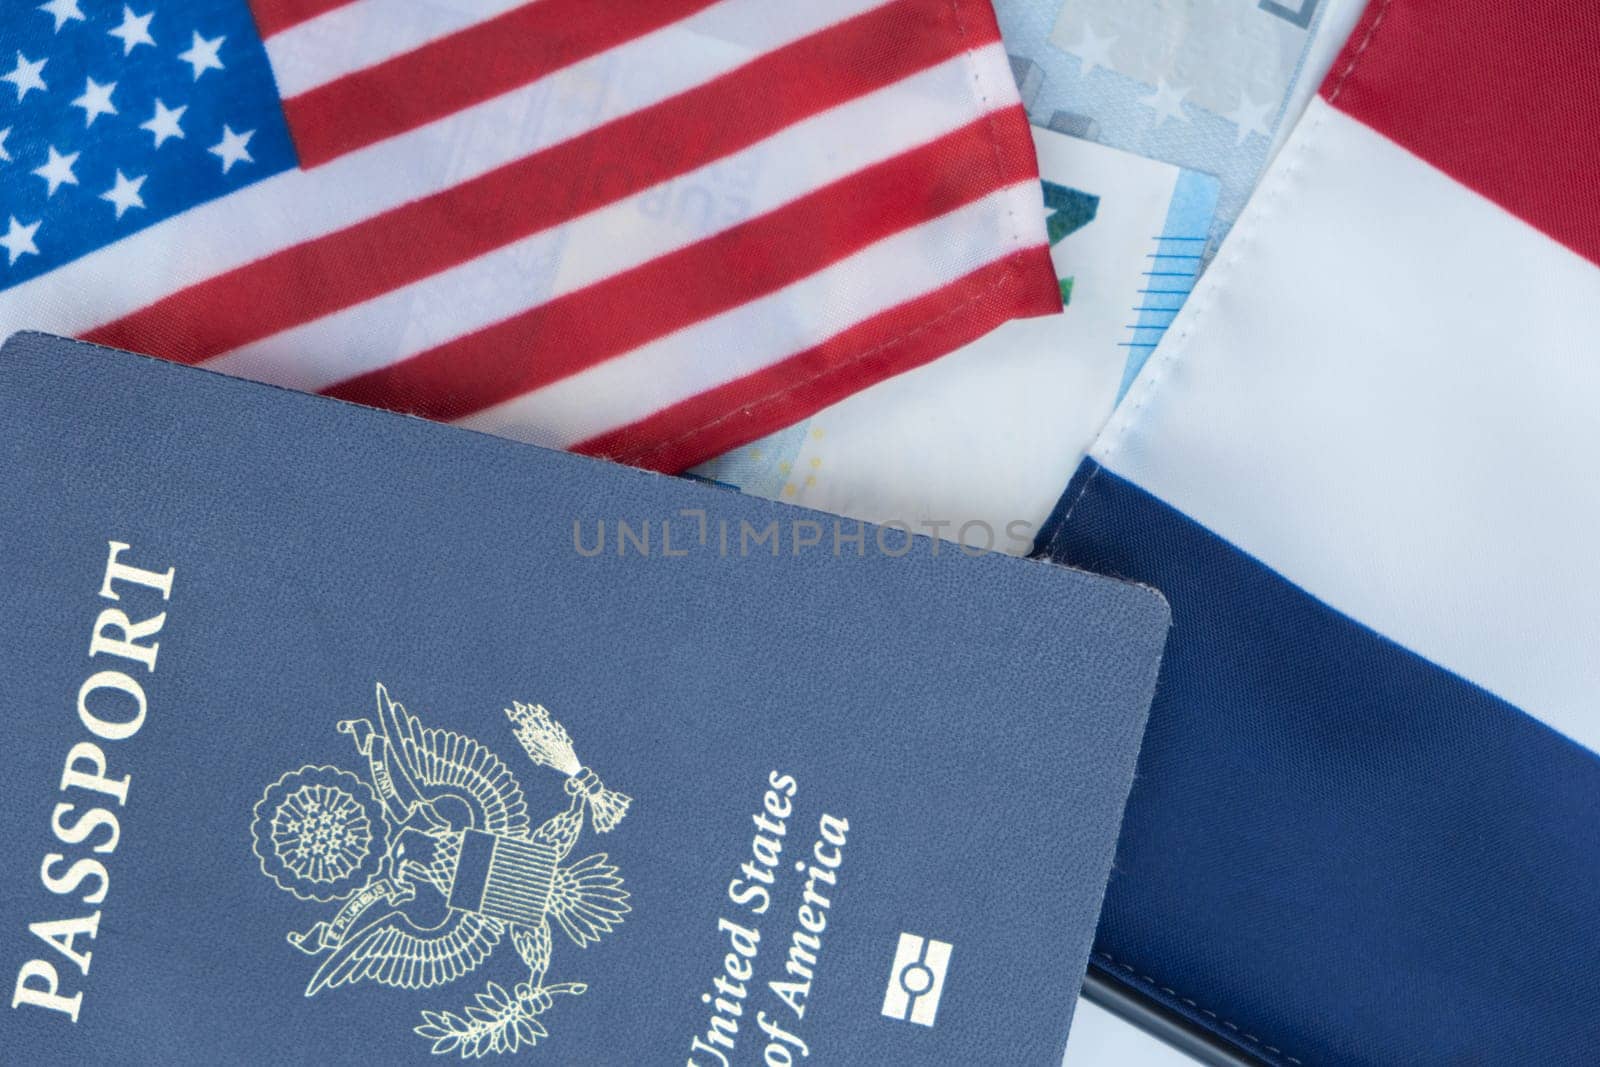 United States passport on Euro currency French and U.S. Flags by bRollGO